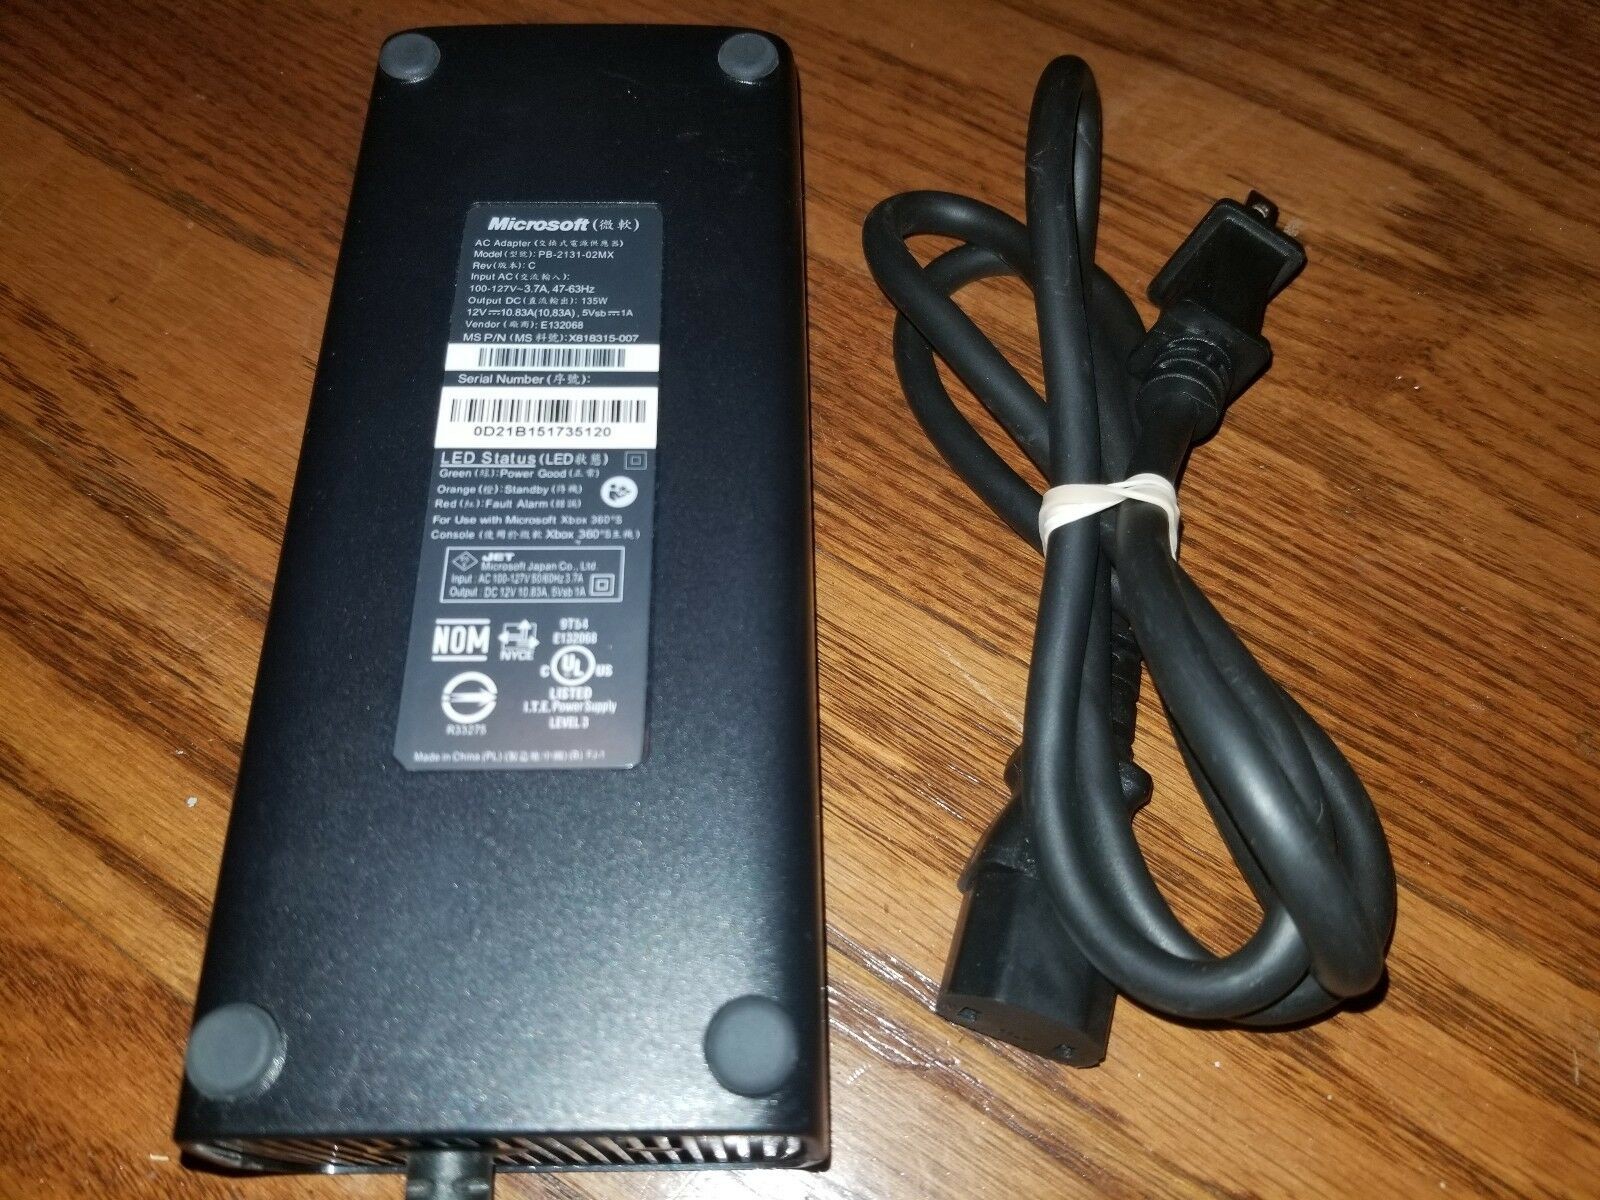 Genuine OEM Microsoft Xbox 360 s Slim 120w Power AC Adapter With AV Cable for sale online